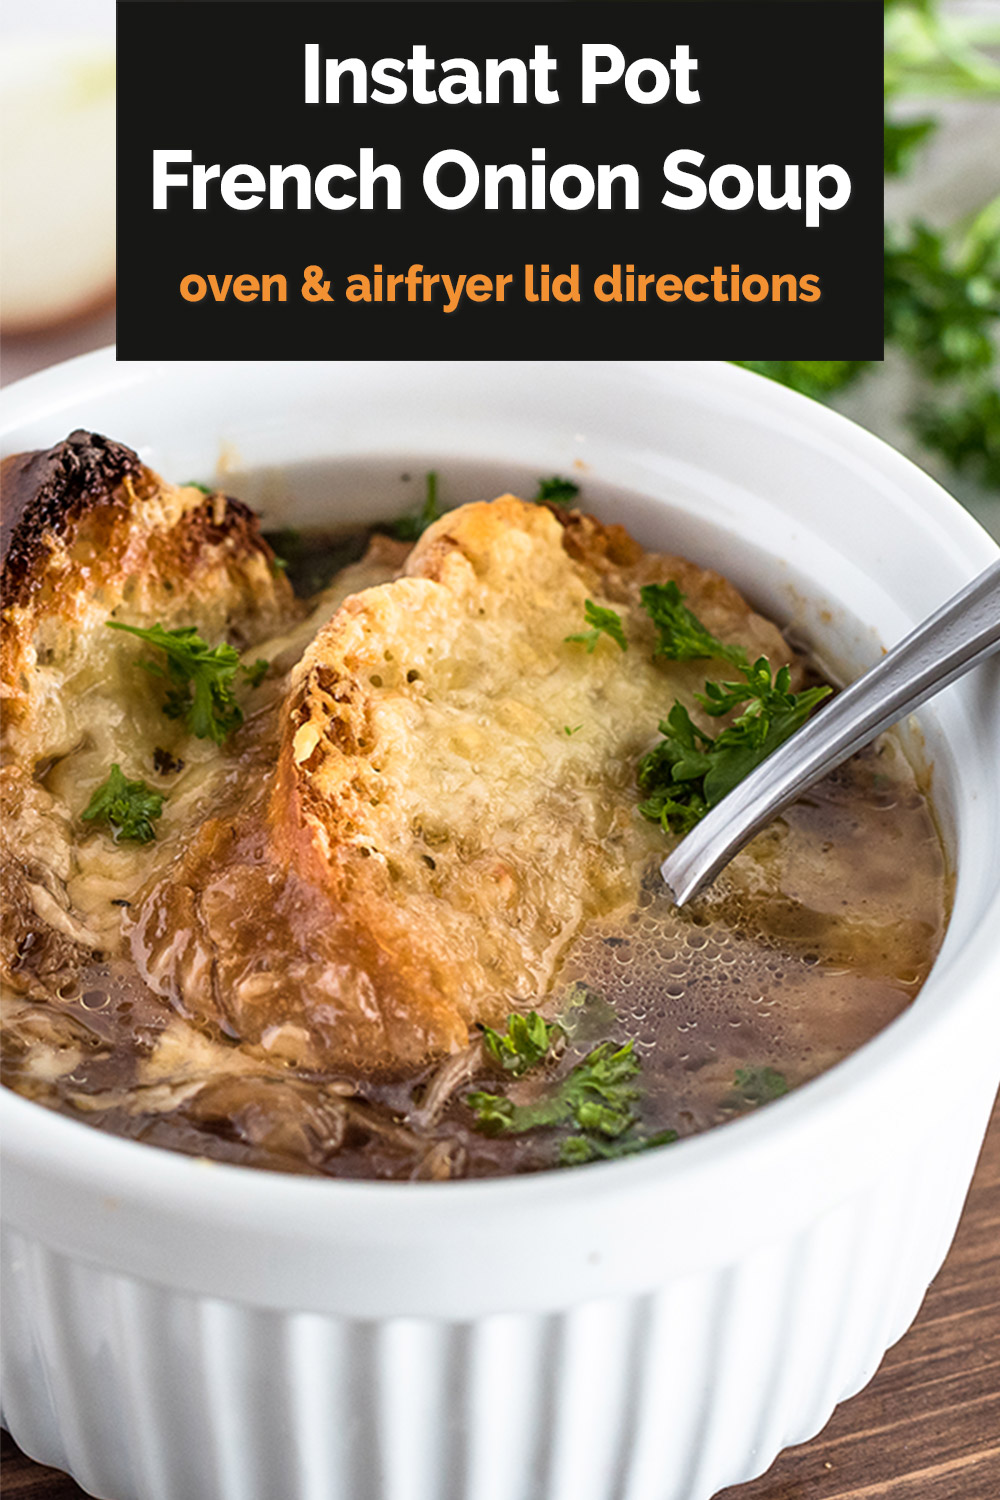 Pinterest Image that reads "Instant Pot French Onion Soup: oven and air fryer lid direction" in a black text box overlaid on a close-up vertical image of French Onion Soup with crusty browned baguettes and melted cheese in a white ramekin via @PressureCook2da